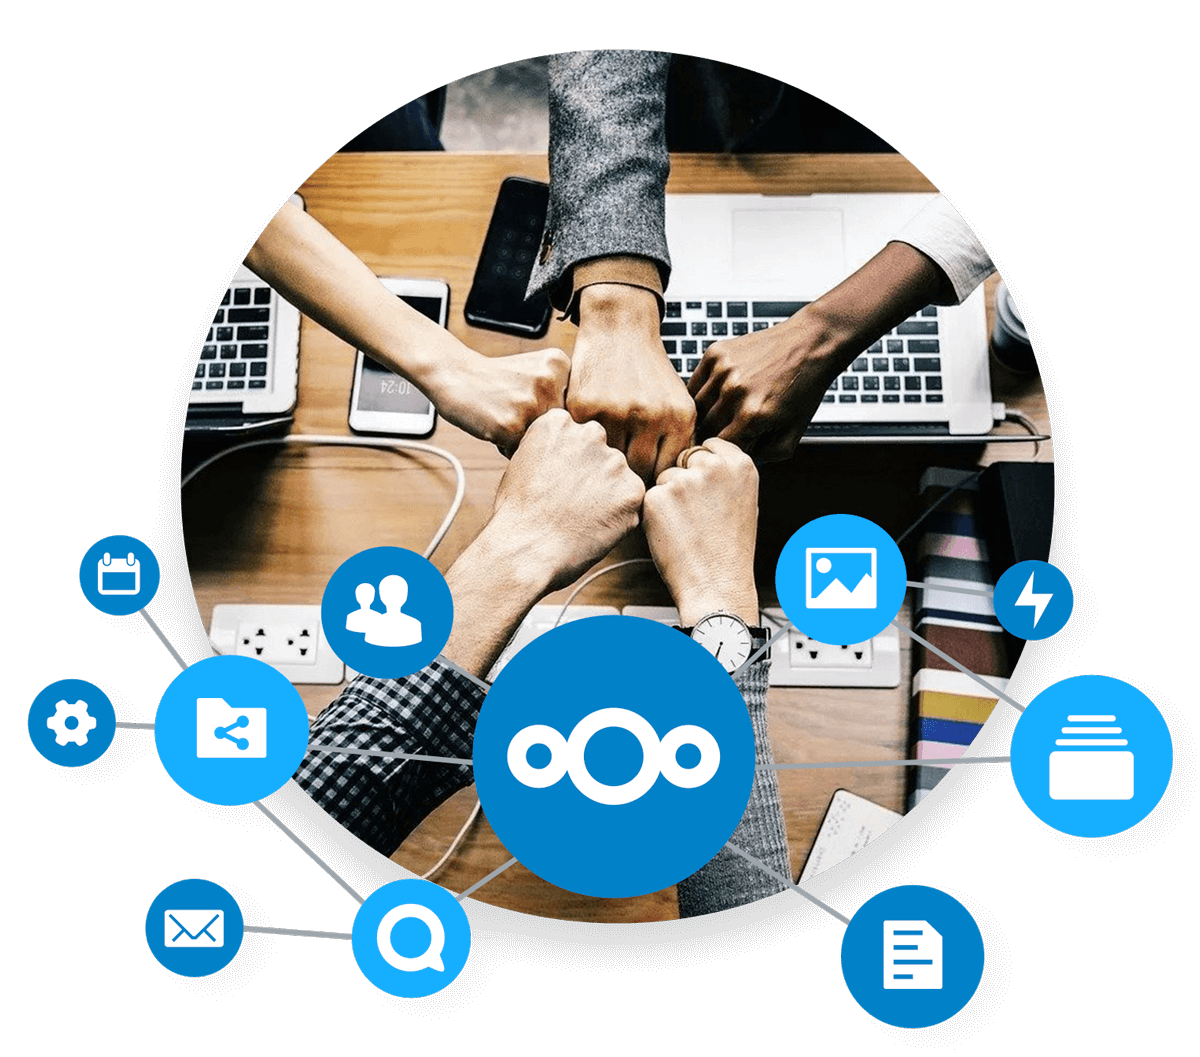 Sharing in Nextcloud collaboration tool